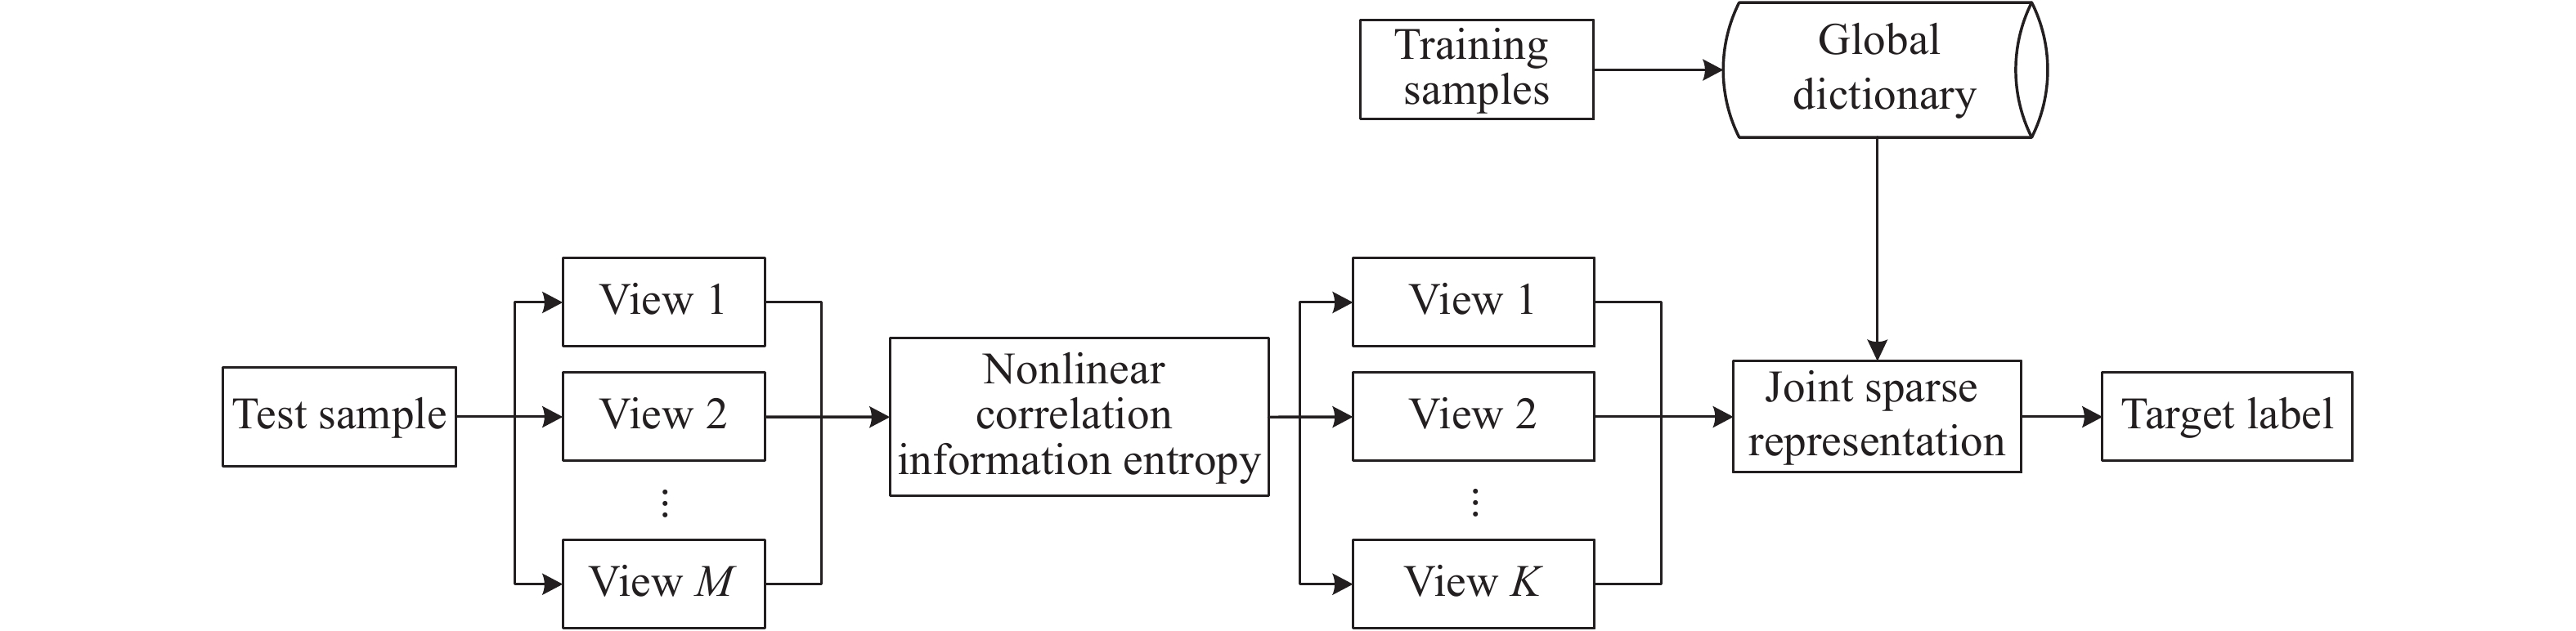 Flowchart of multi-view SAR target classification based on maximum entropy